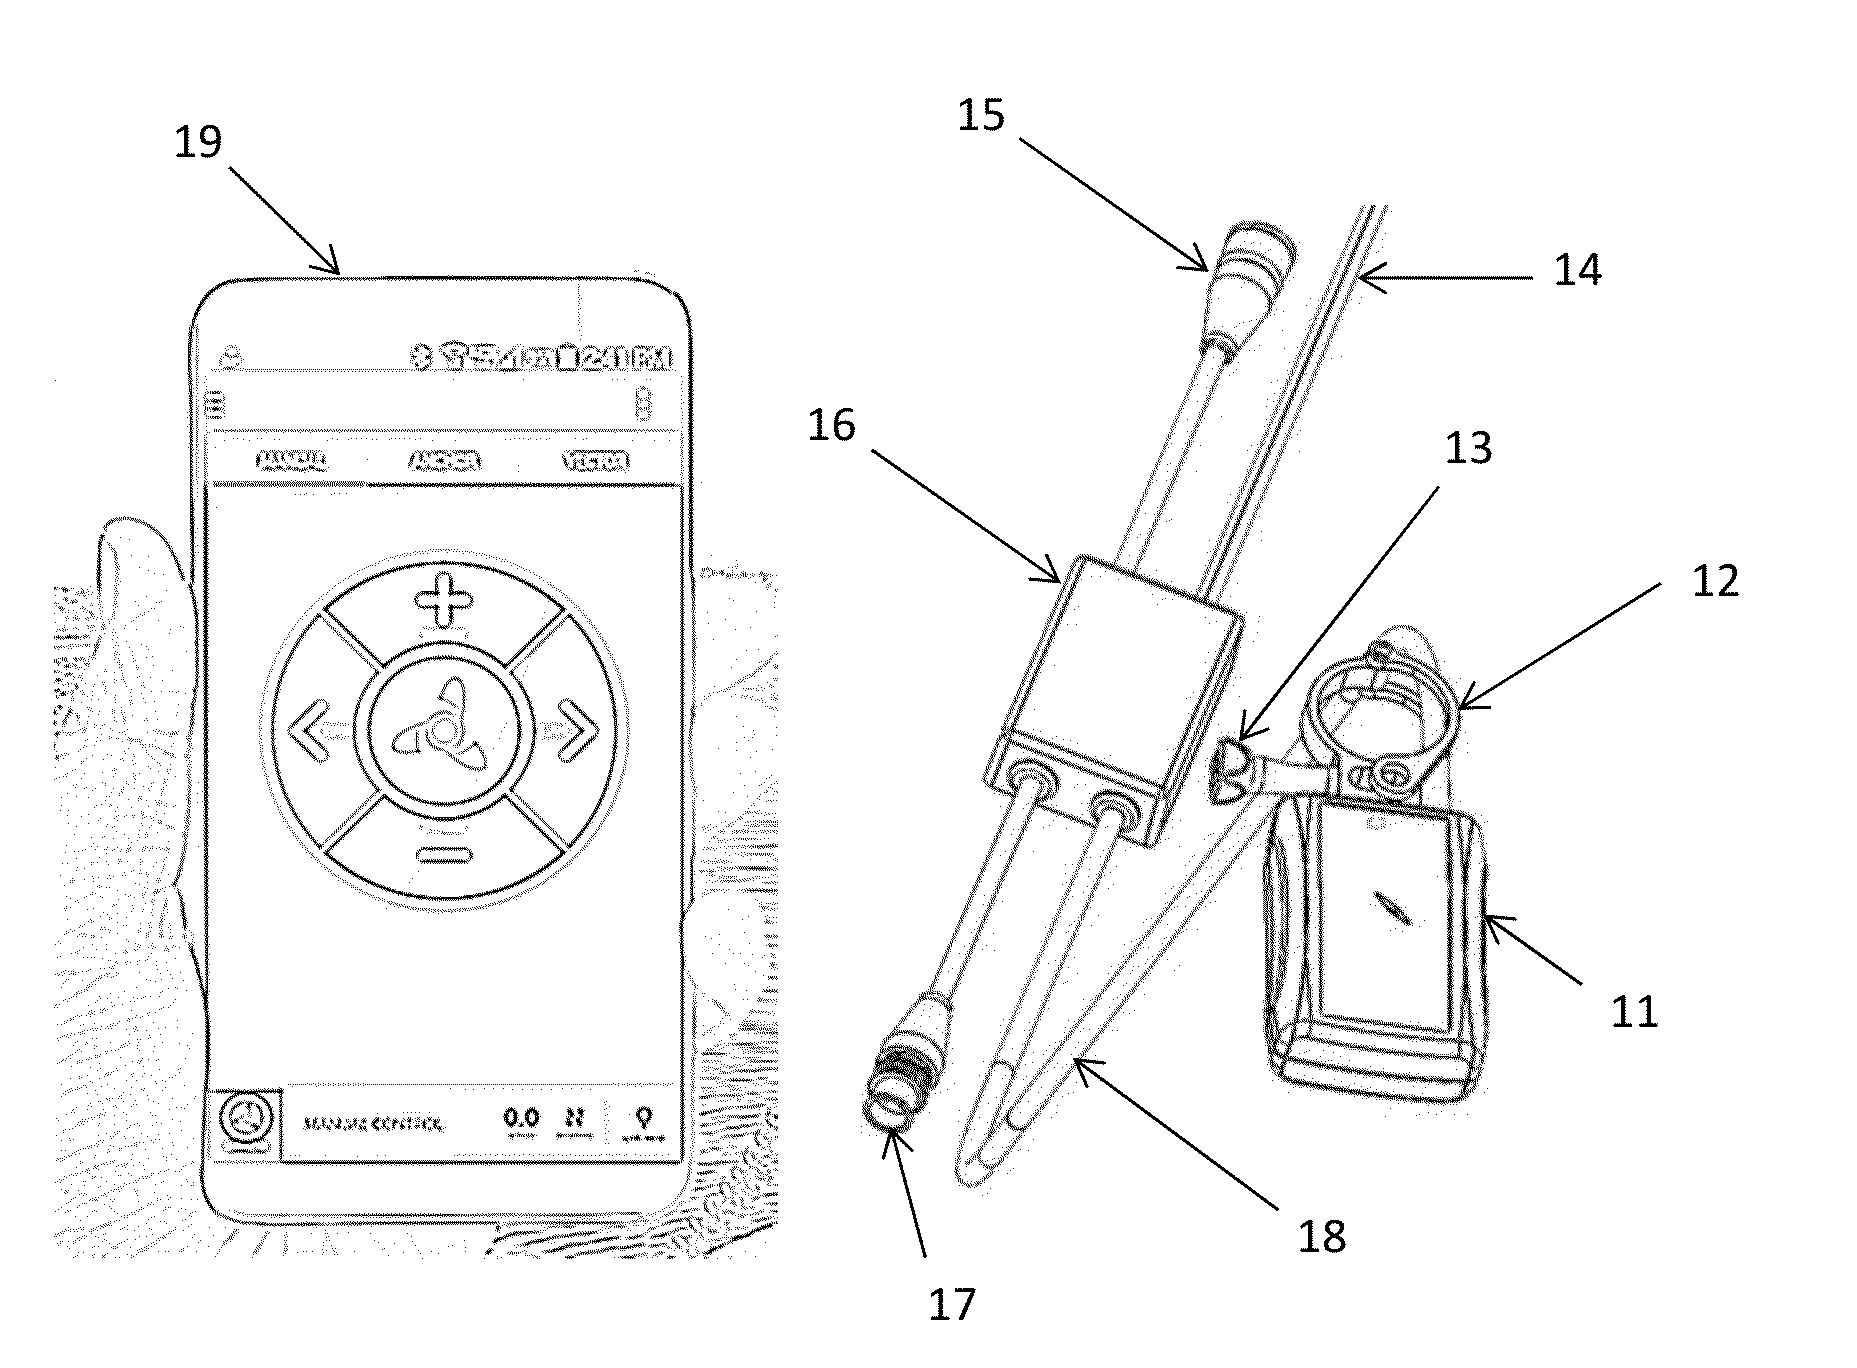 Networked architecture for a control system for a steerable thrusting device